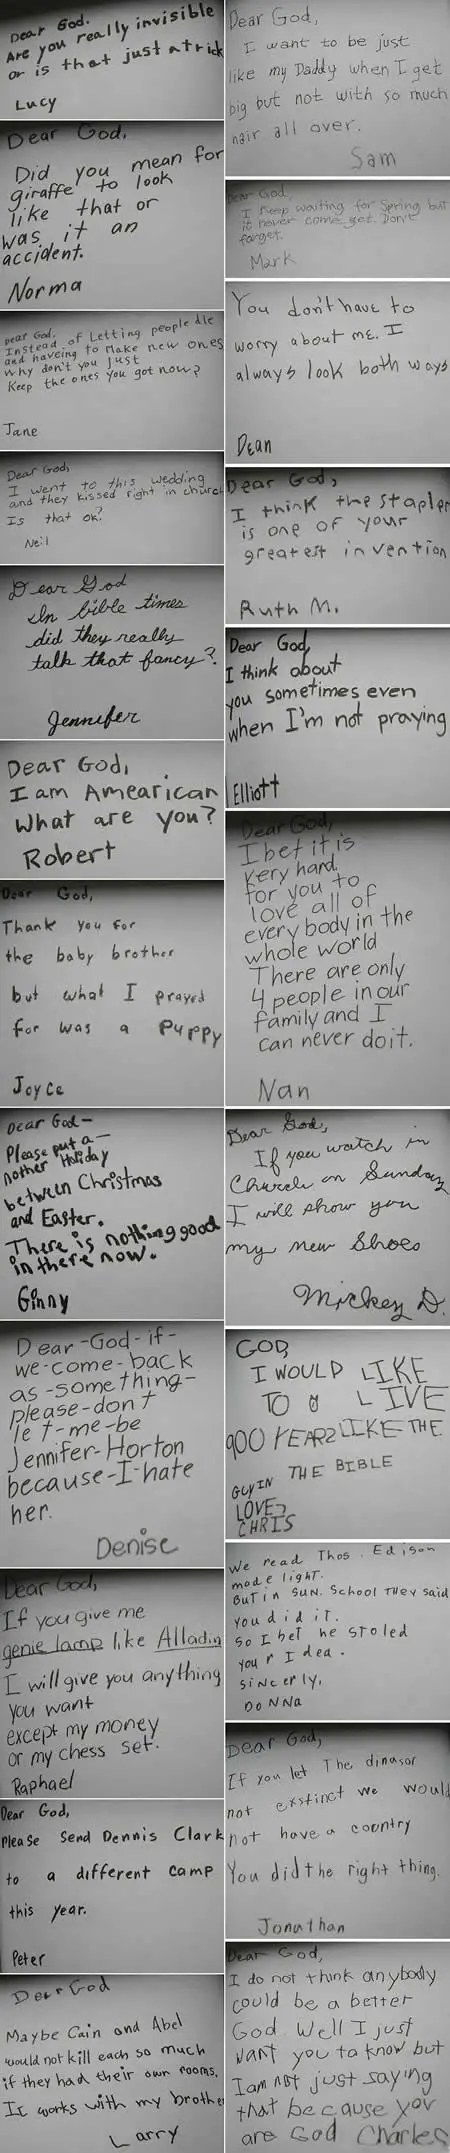 Funny Picture - Children's Letters To God